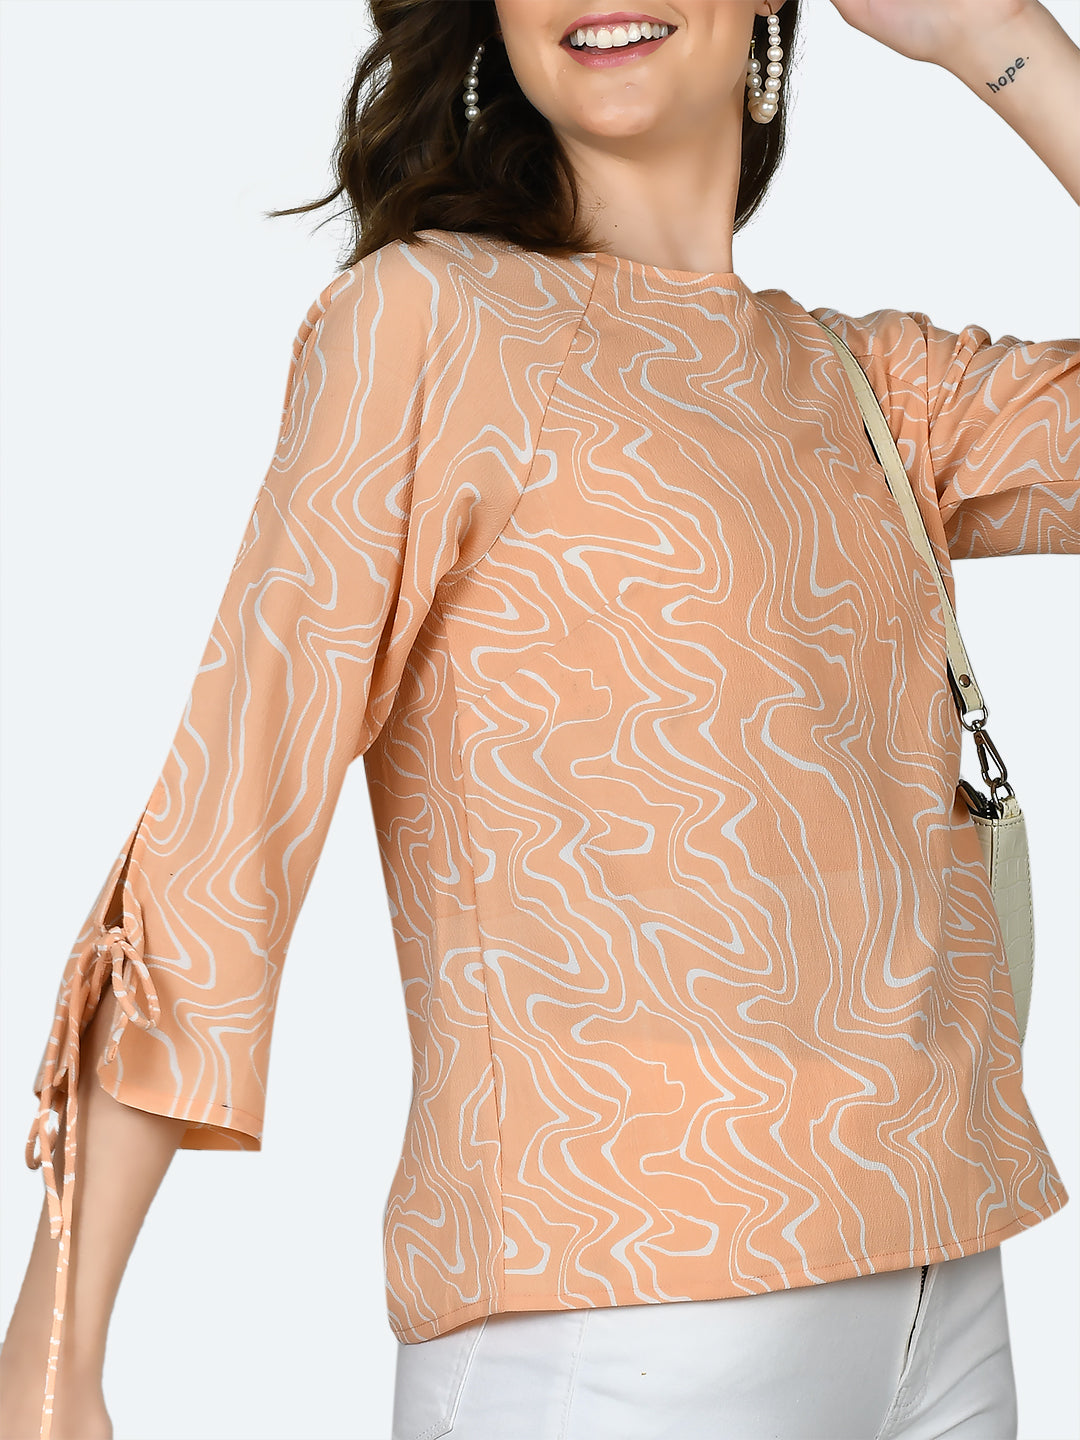 Peach Printed Tie-Up Top For Women